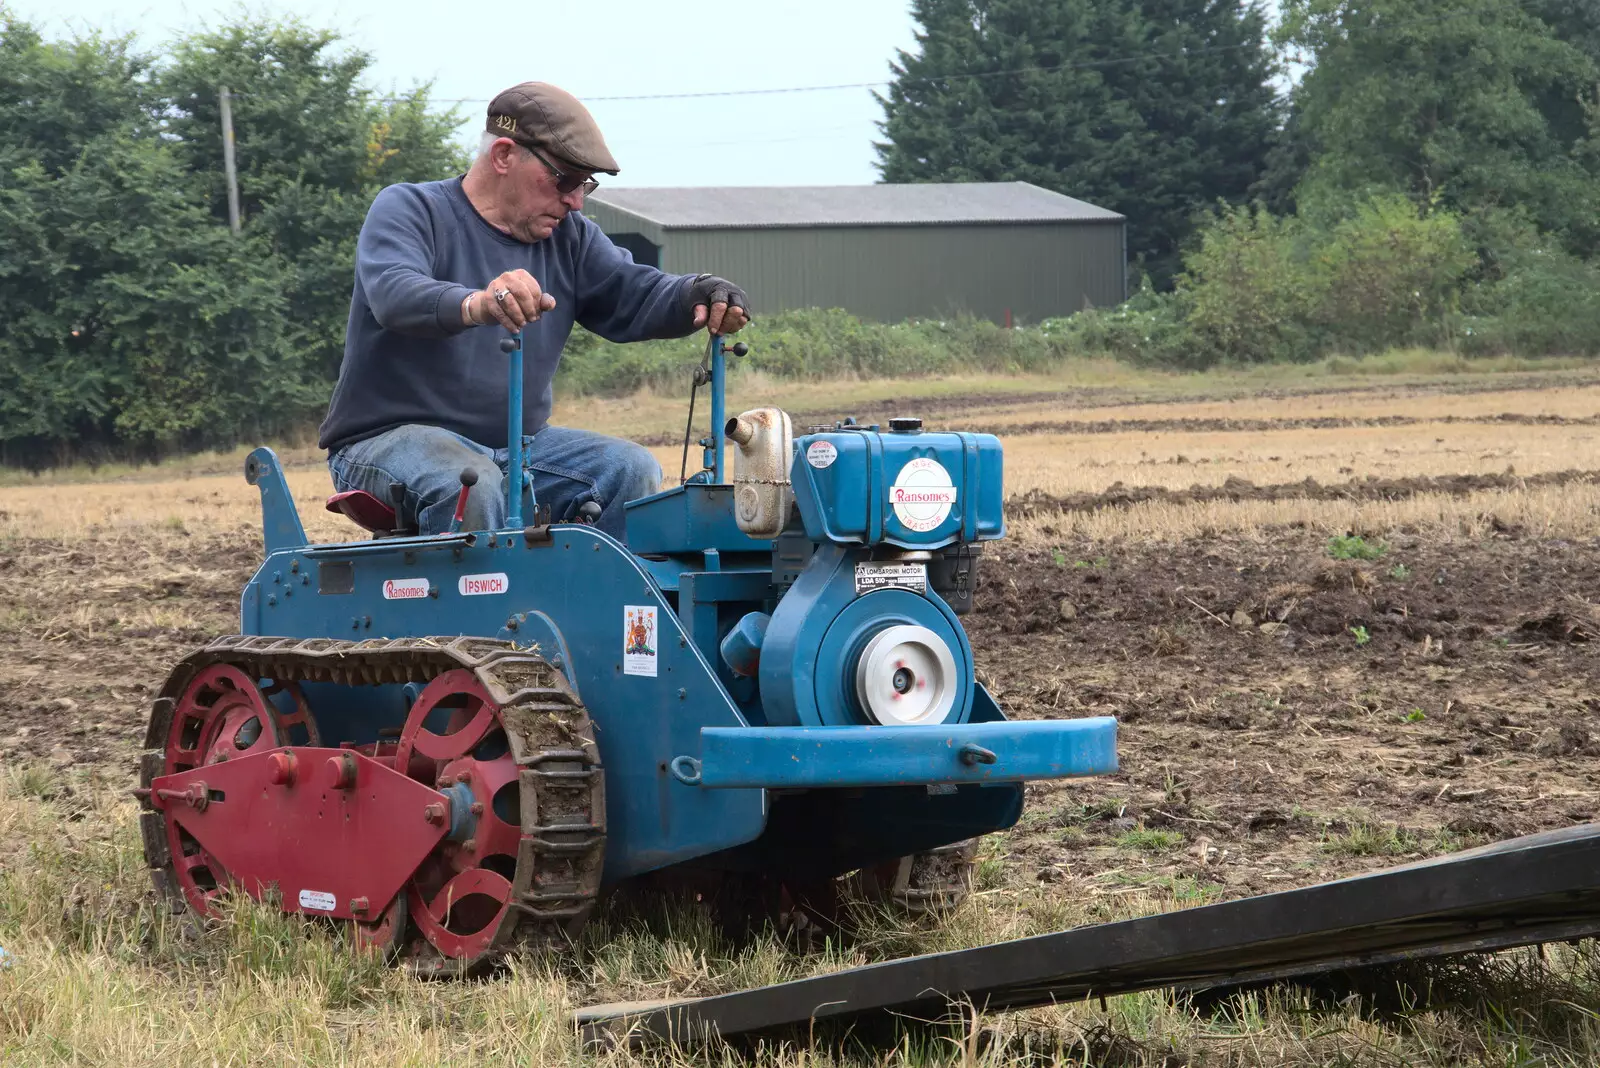 The Ransome's micro tractor is driven up a ramp, from Vintage Tractor Ploughing, Thrandeston, Suffolk - 26th September 2021